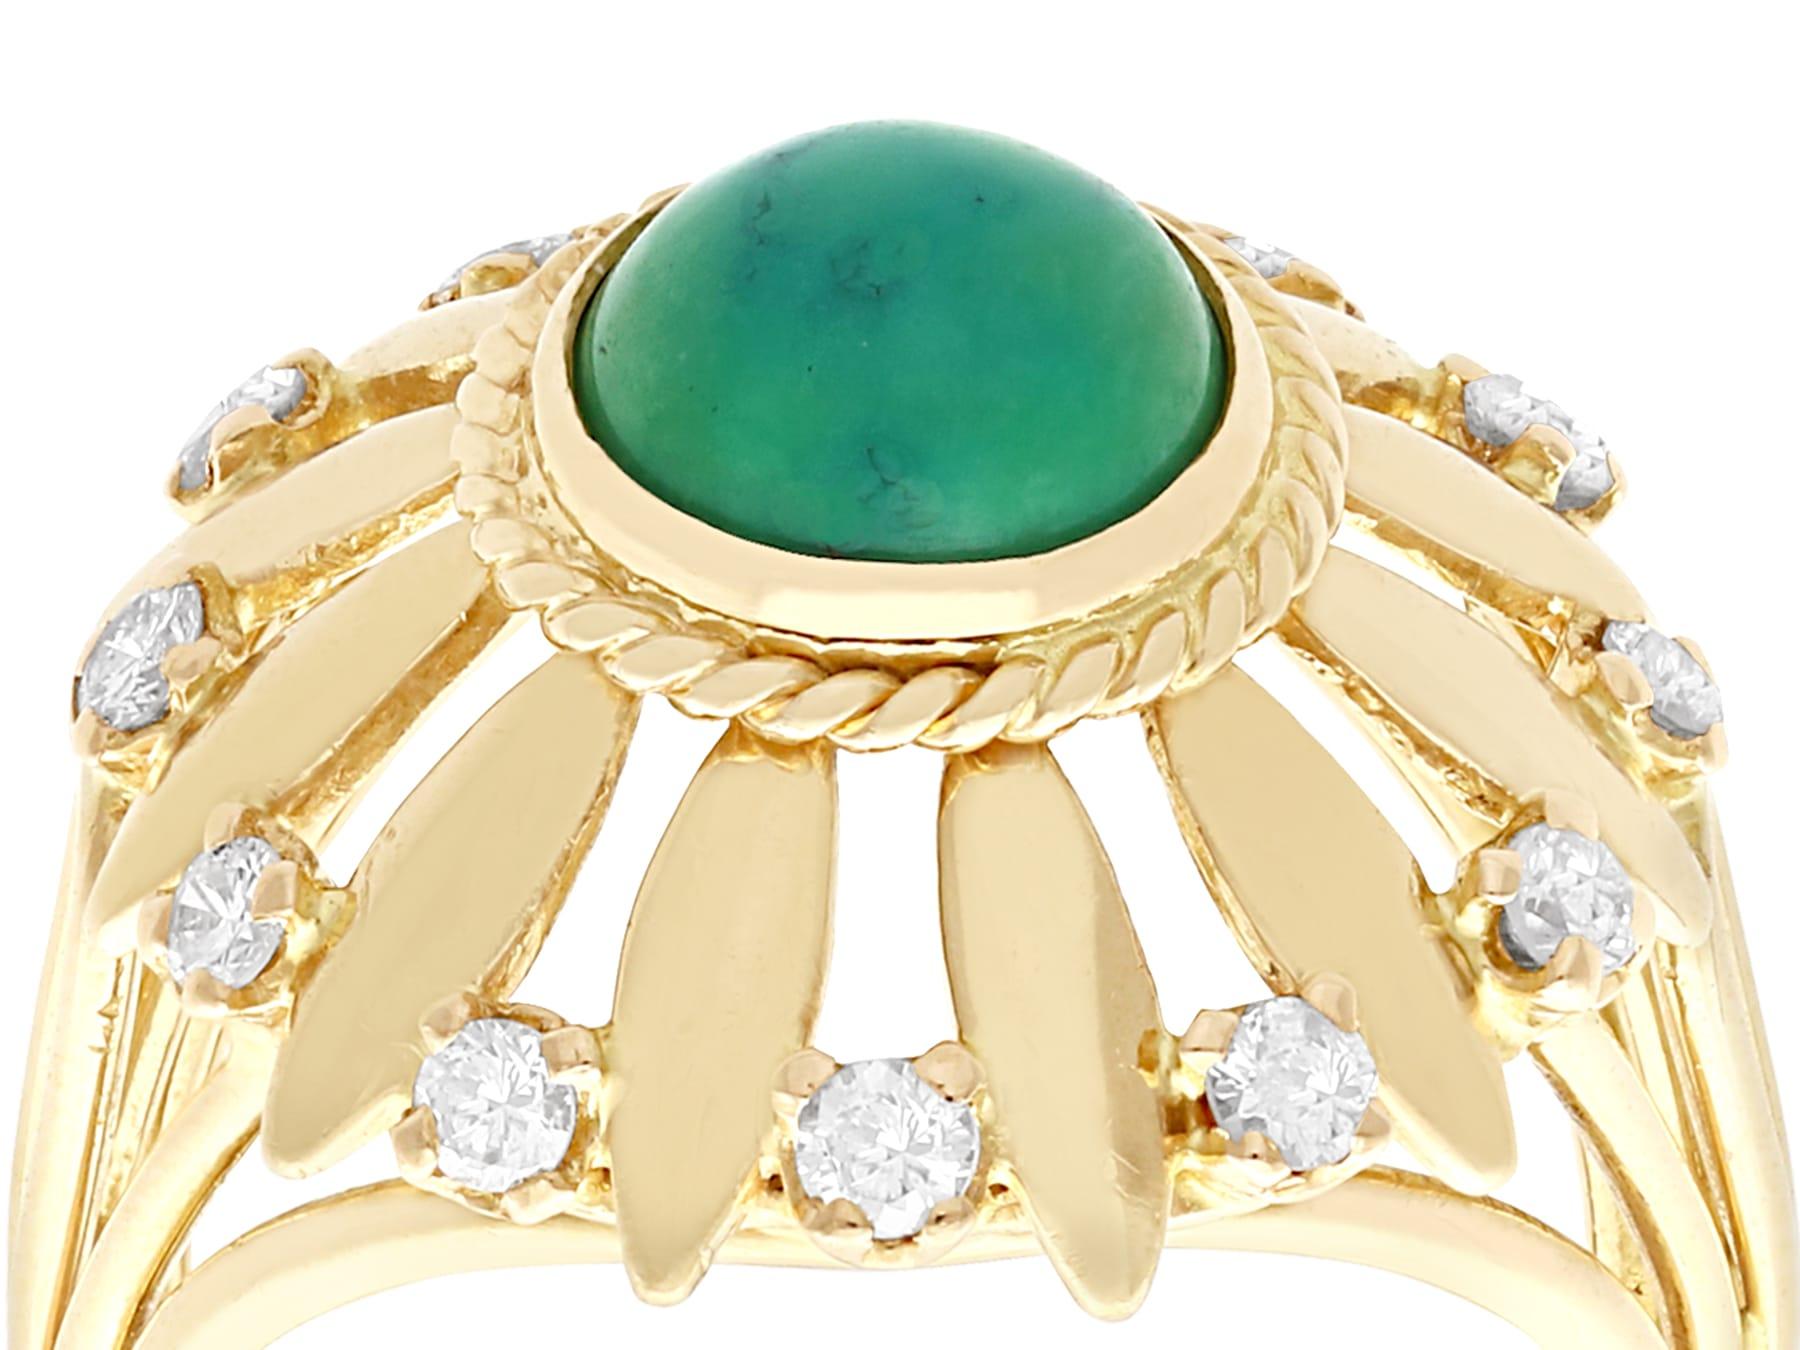 A fine and impressive vintage turquoise and 0.25 carat diamond, 18 karat yellow gold cocktail ring; part of our diverse antique jewelry and estate jewelry collections.

This fine and impressive vintage turquoise ring has been crafted in 18k yellow